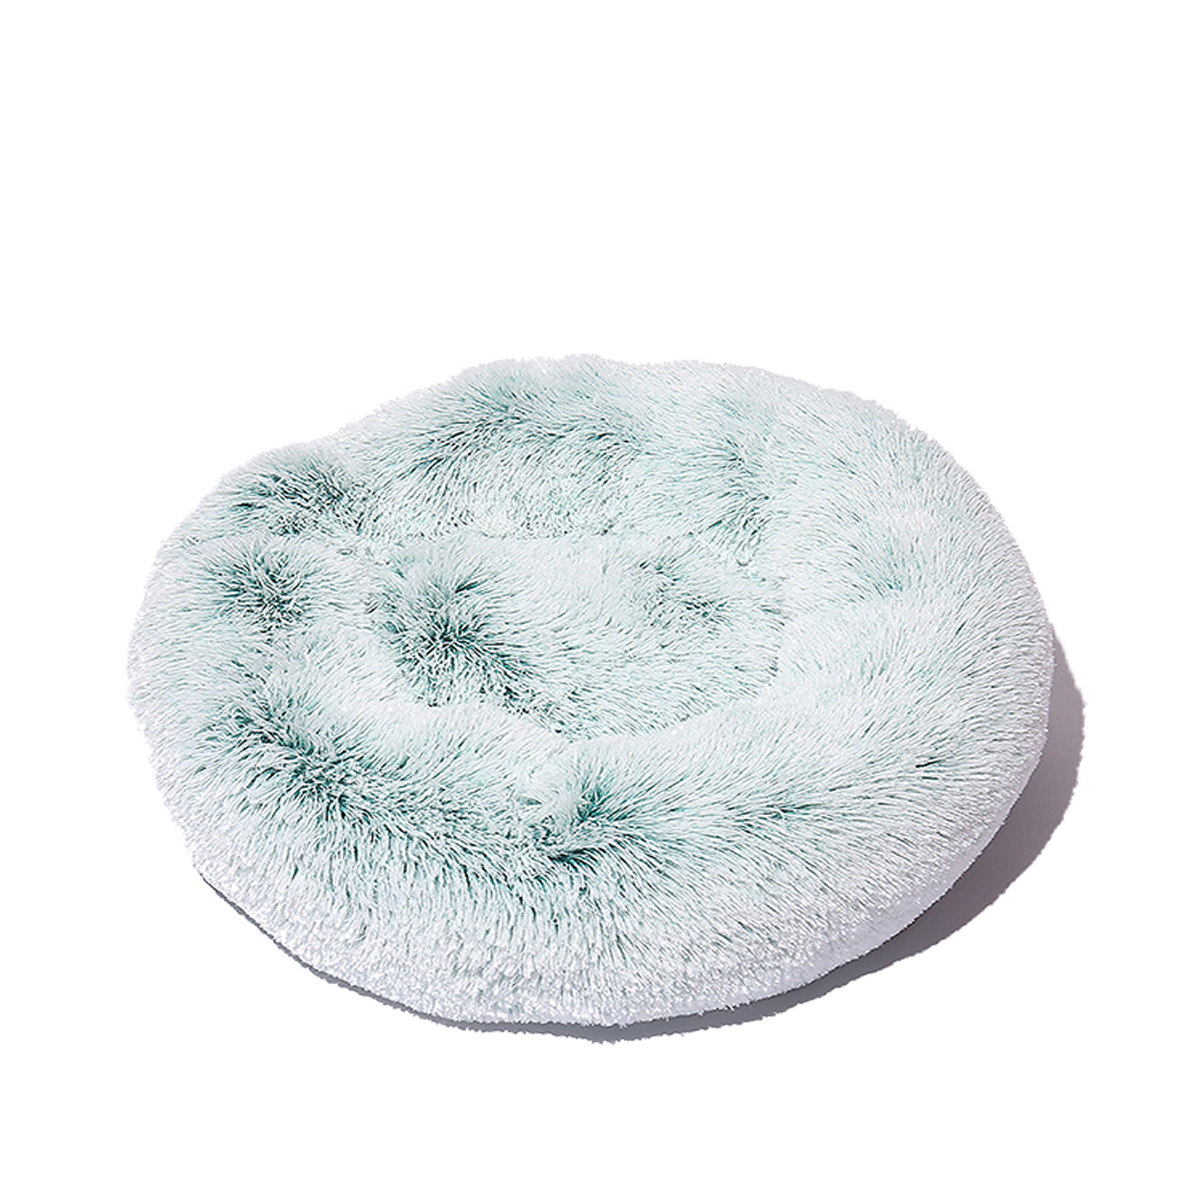 70cm-Plush-Fluffy-Soft-Pet-Bed-for-Cats--Dogs-Calming-Bed-Pad-Soft-Mat-Home-1808936-8